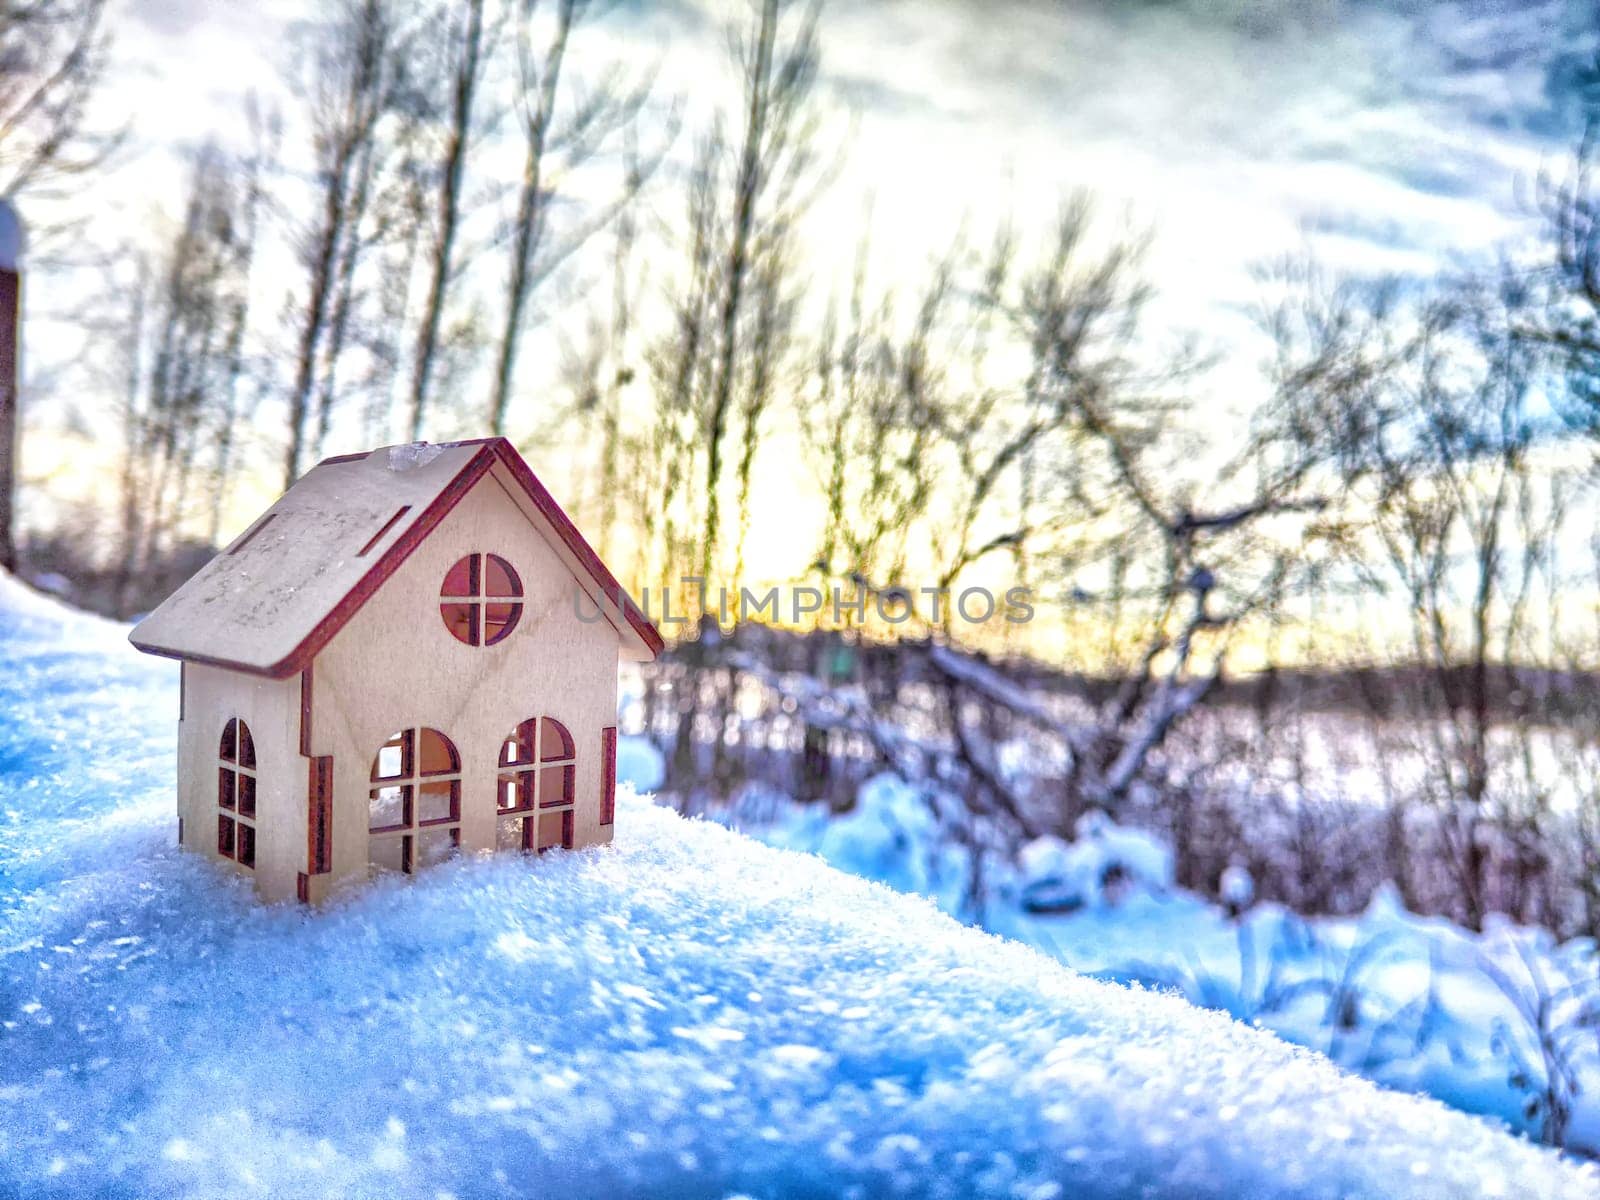 Wooden toy house on snow, natural abstract background. winter season concept. Christmas and new year holidays. symbol of cozy, loving family home. construction, sales, rental concept. copy space by keleny